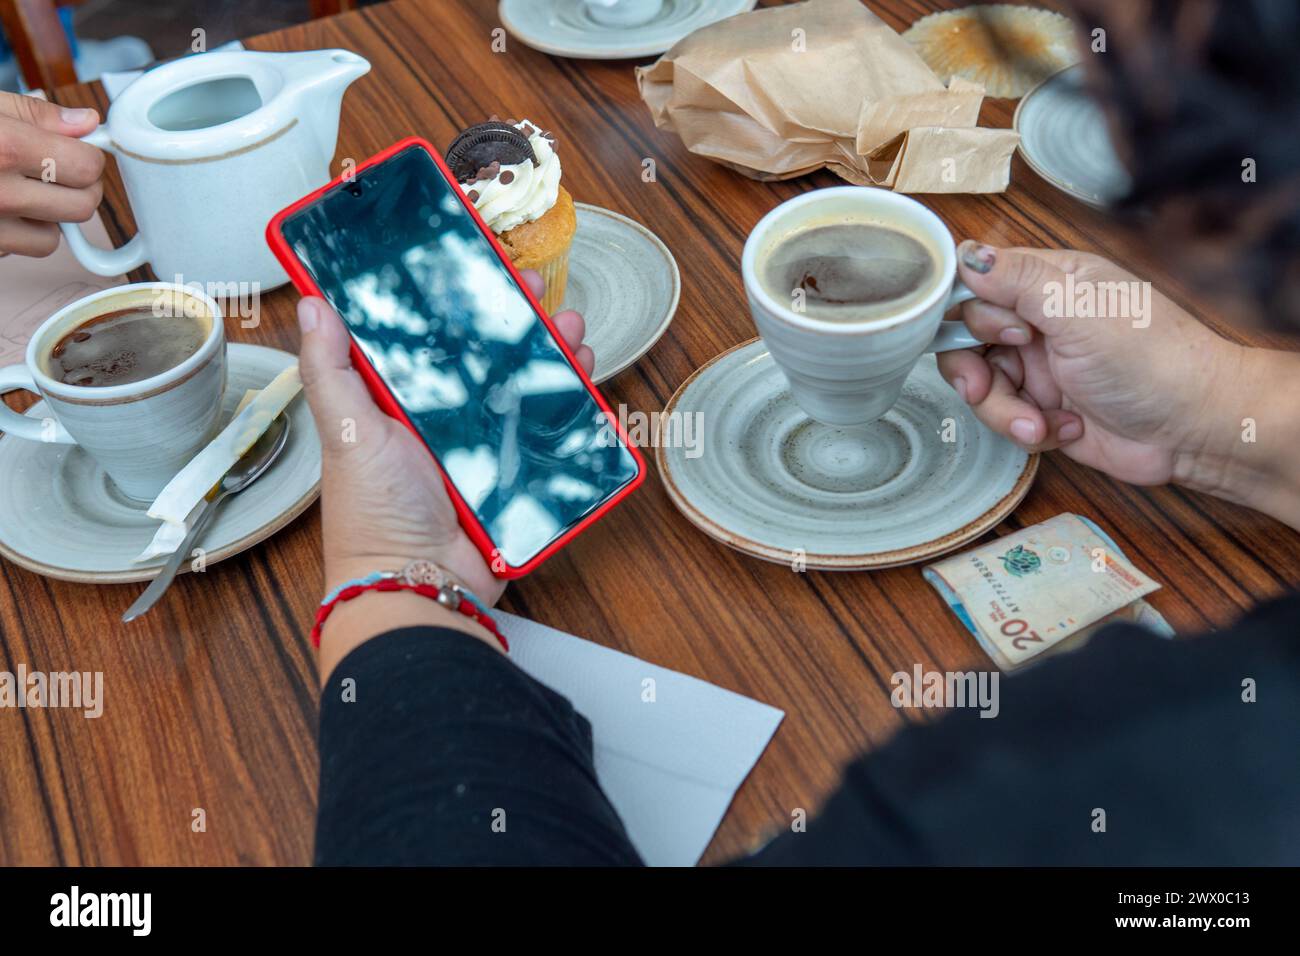 Unrecognizable woman drinking a cup of coffee while looking at her cell phone next to a cupcake and a 20 Colombian peso bill in a cafeteria Stock Photo